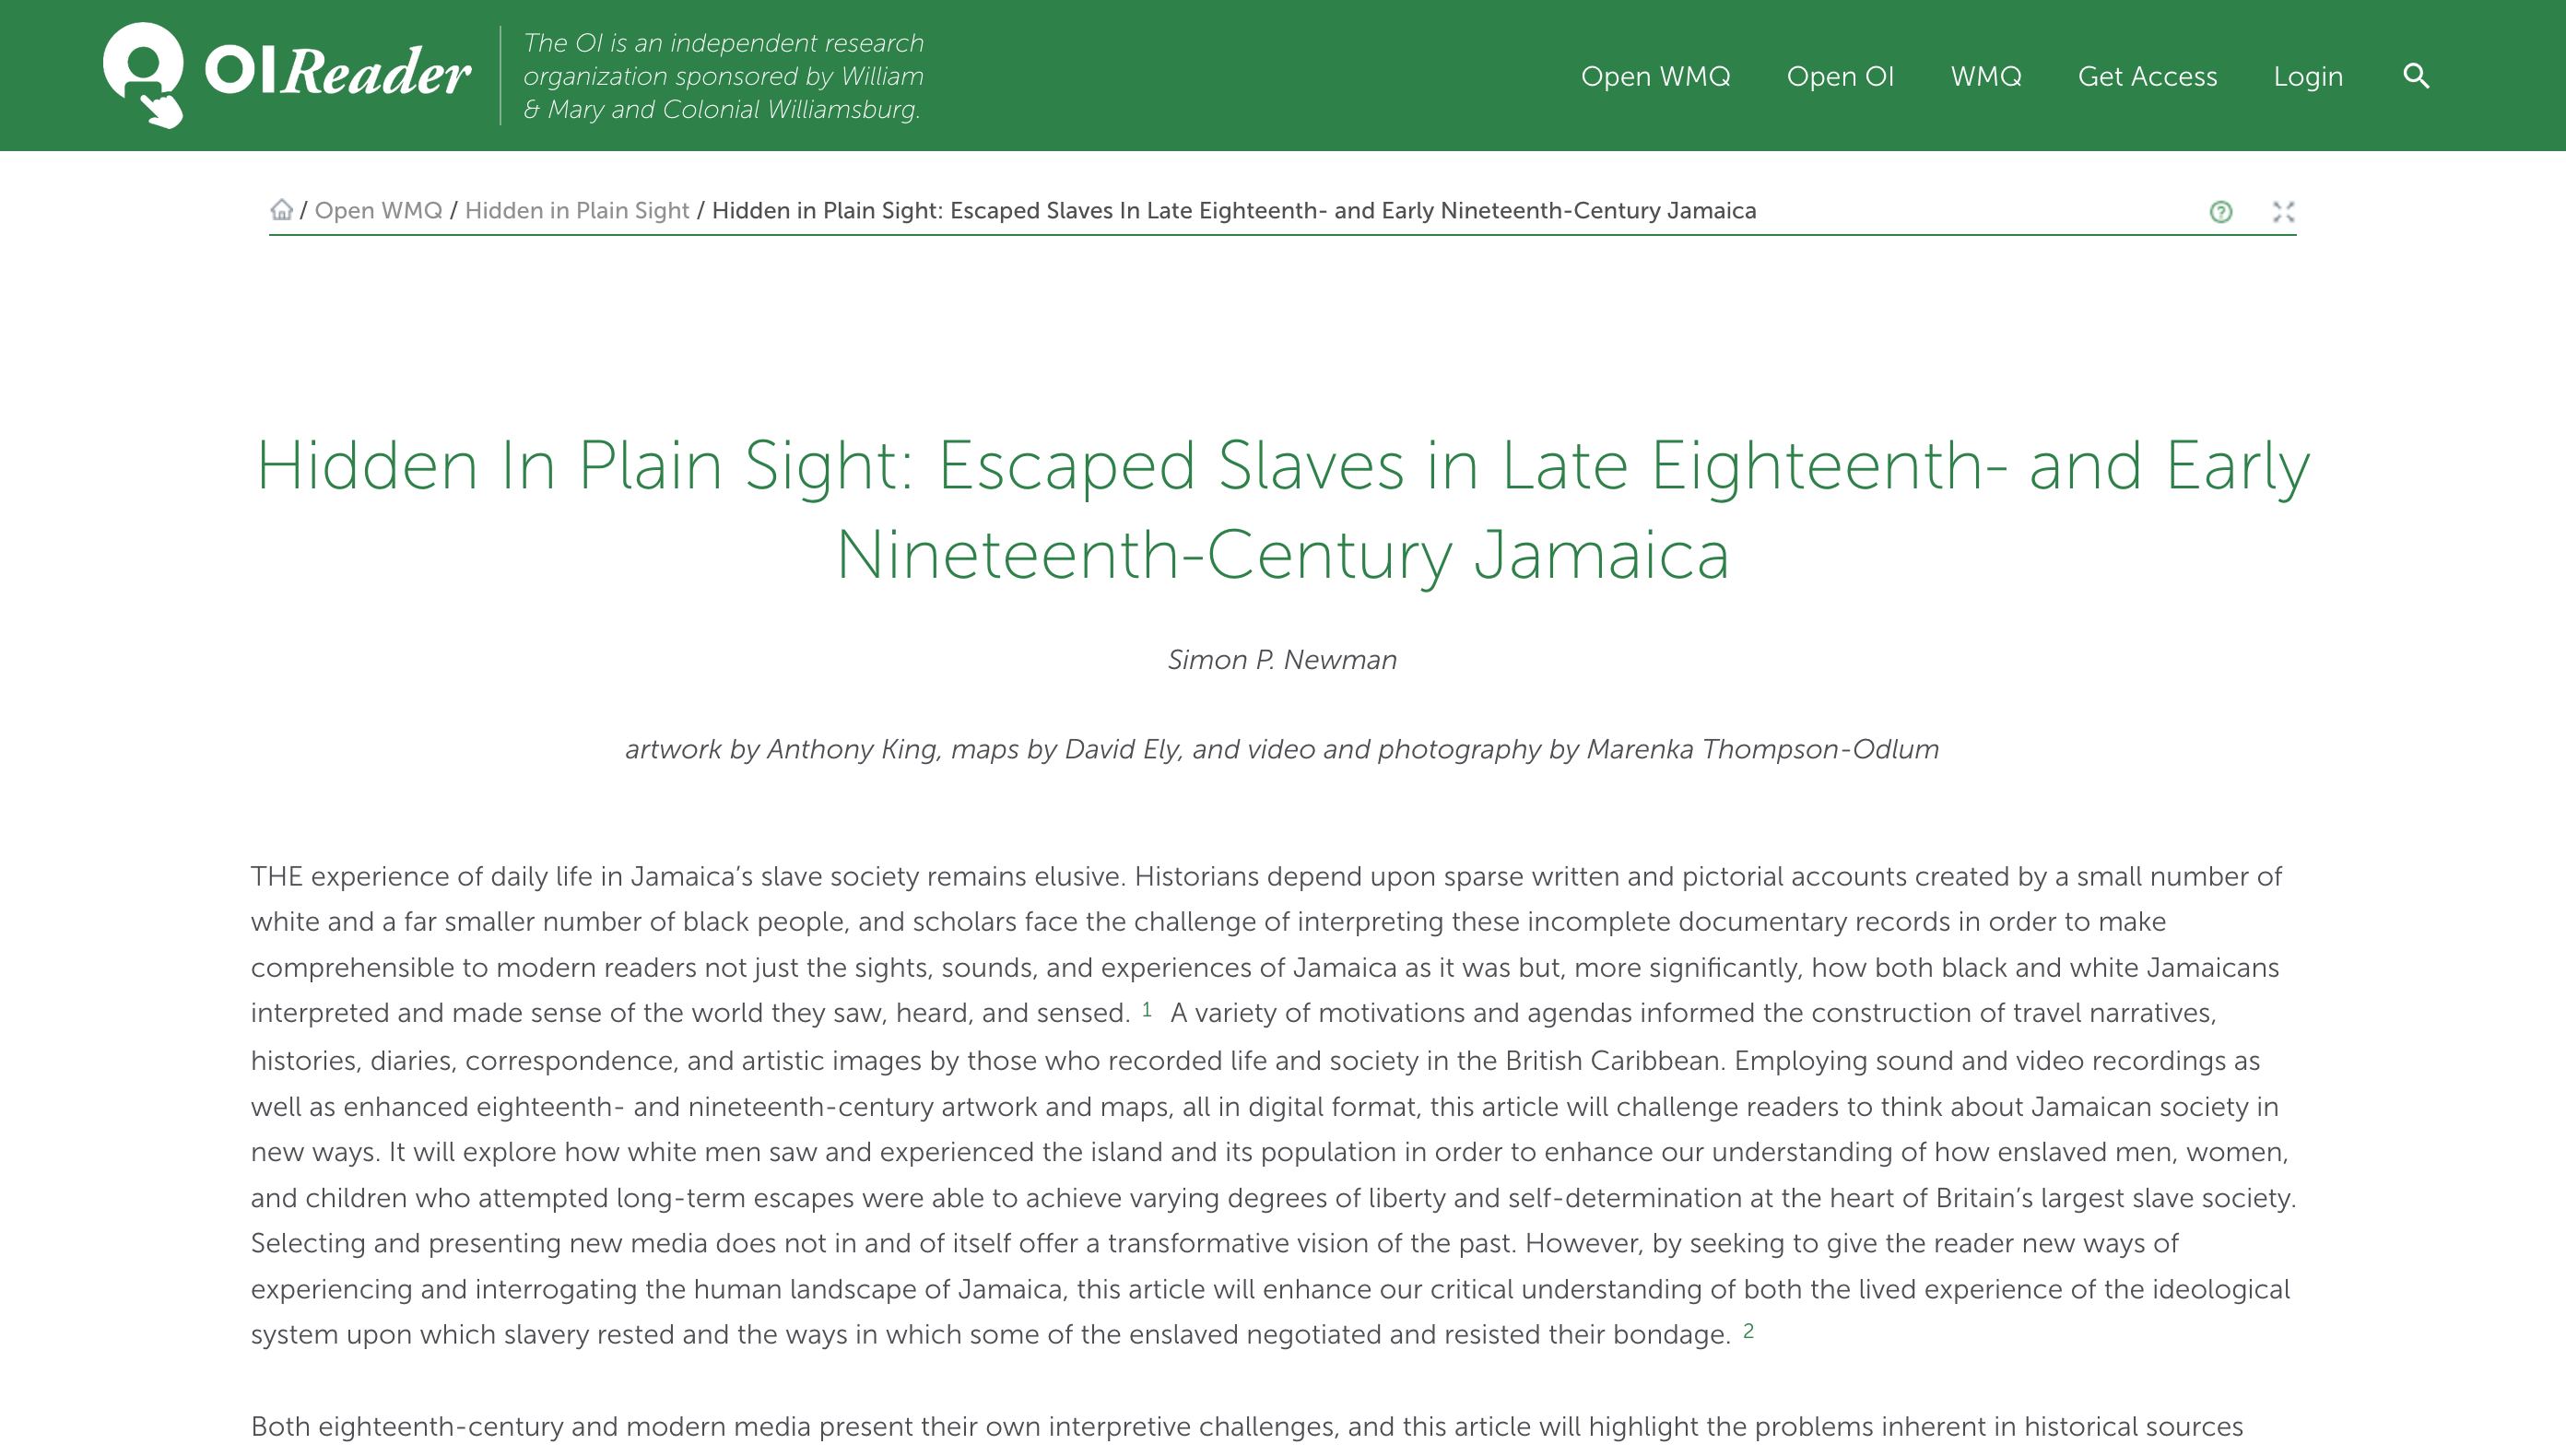 Hidden in Plain Sight: Escaped Slaves in late eighteenth and early nineteenth century Jamaica